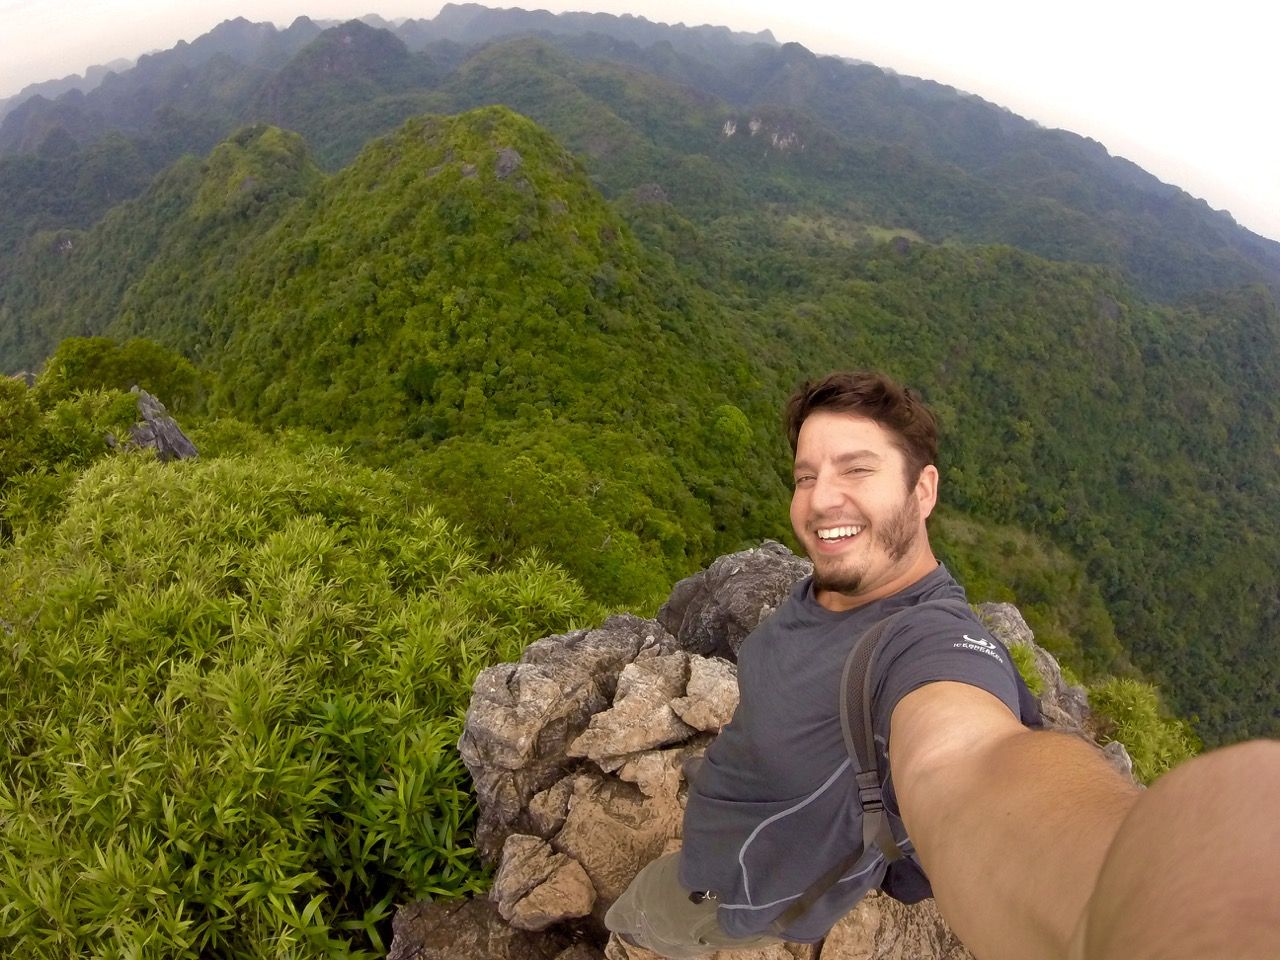 Man smiling into camera while standing on a mountain.